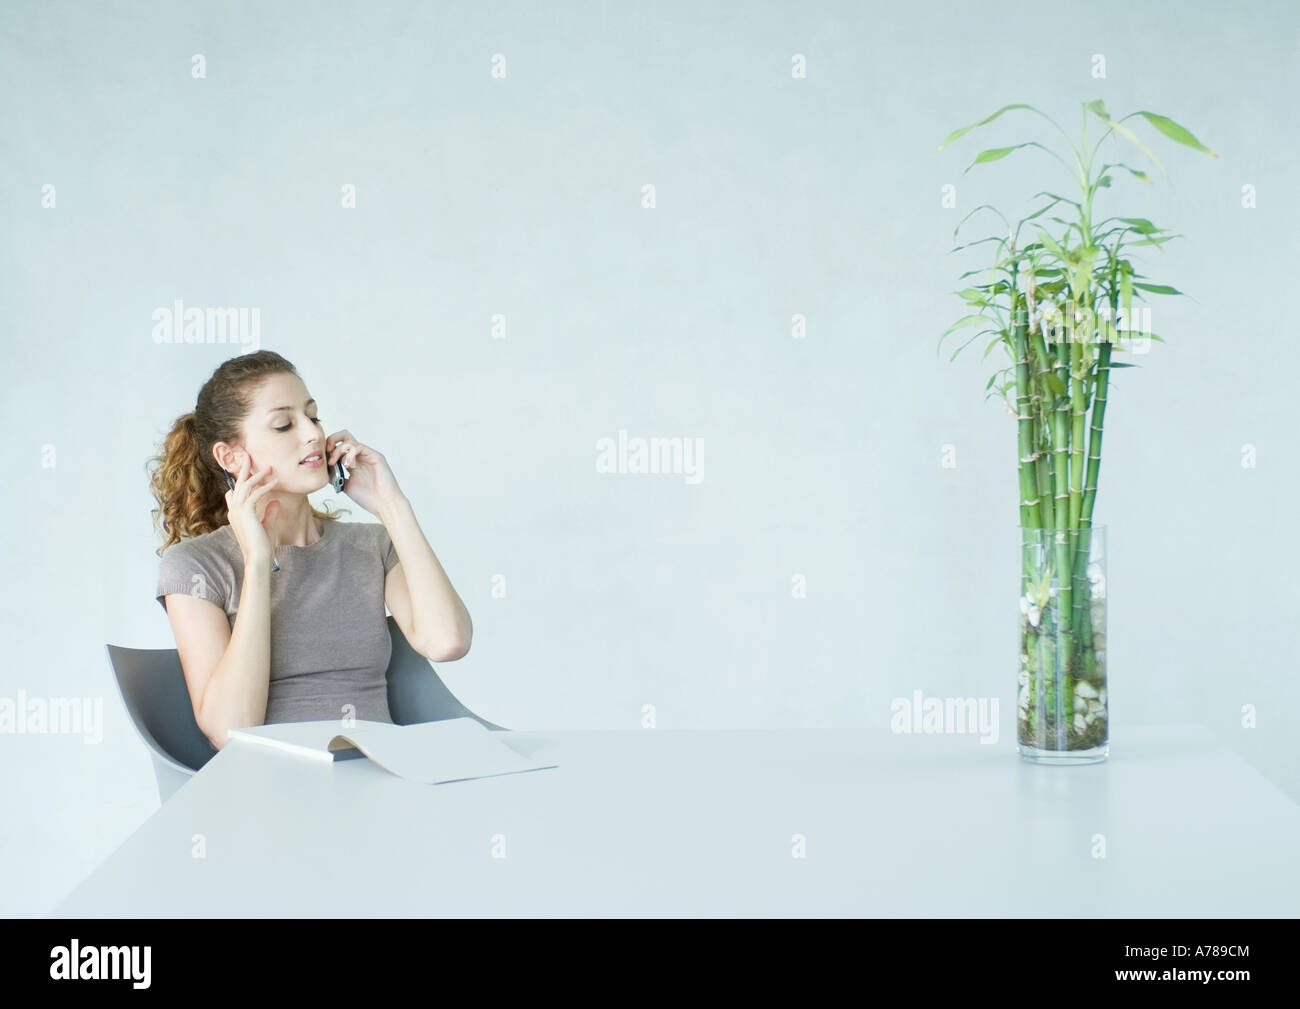 Woman using cell phone, pad of paper on table in front of her Stock Photo